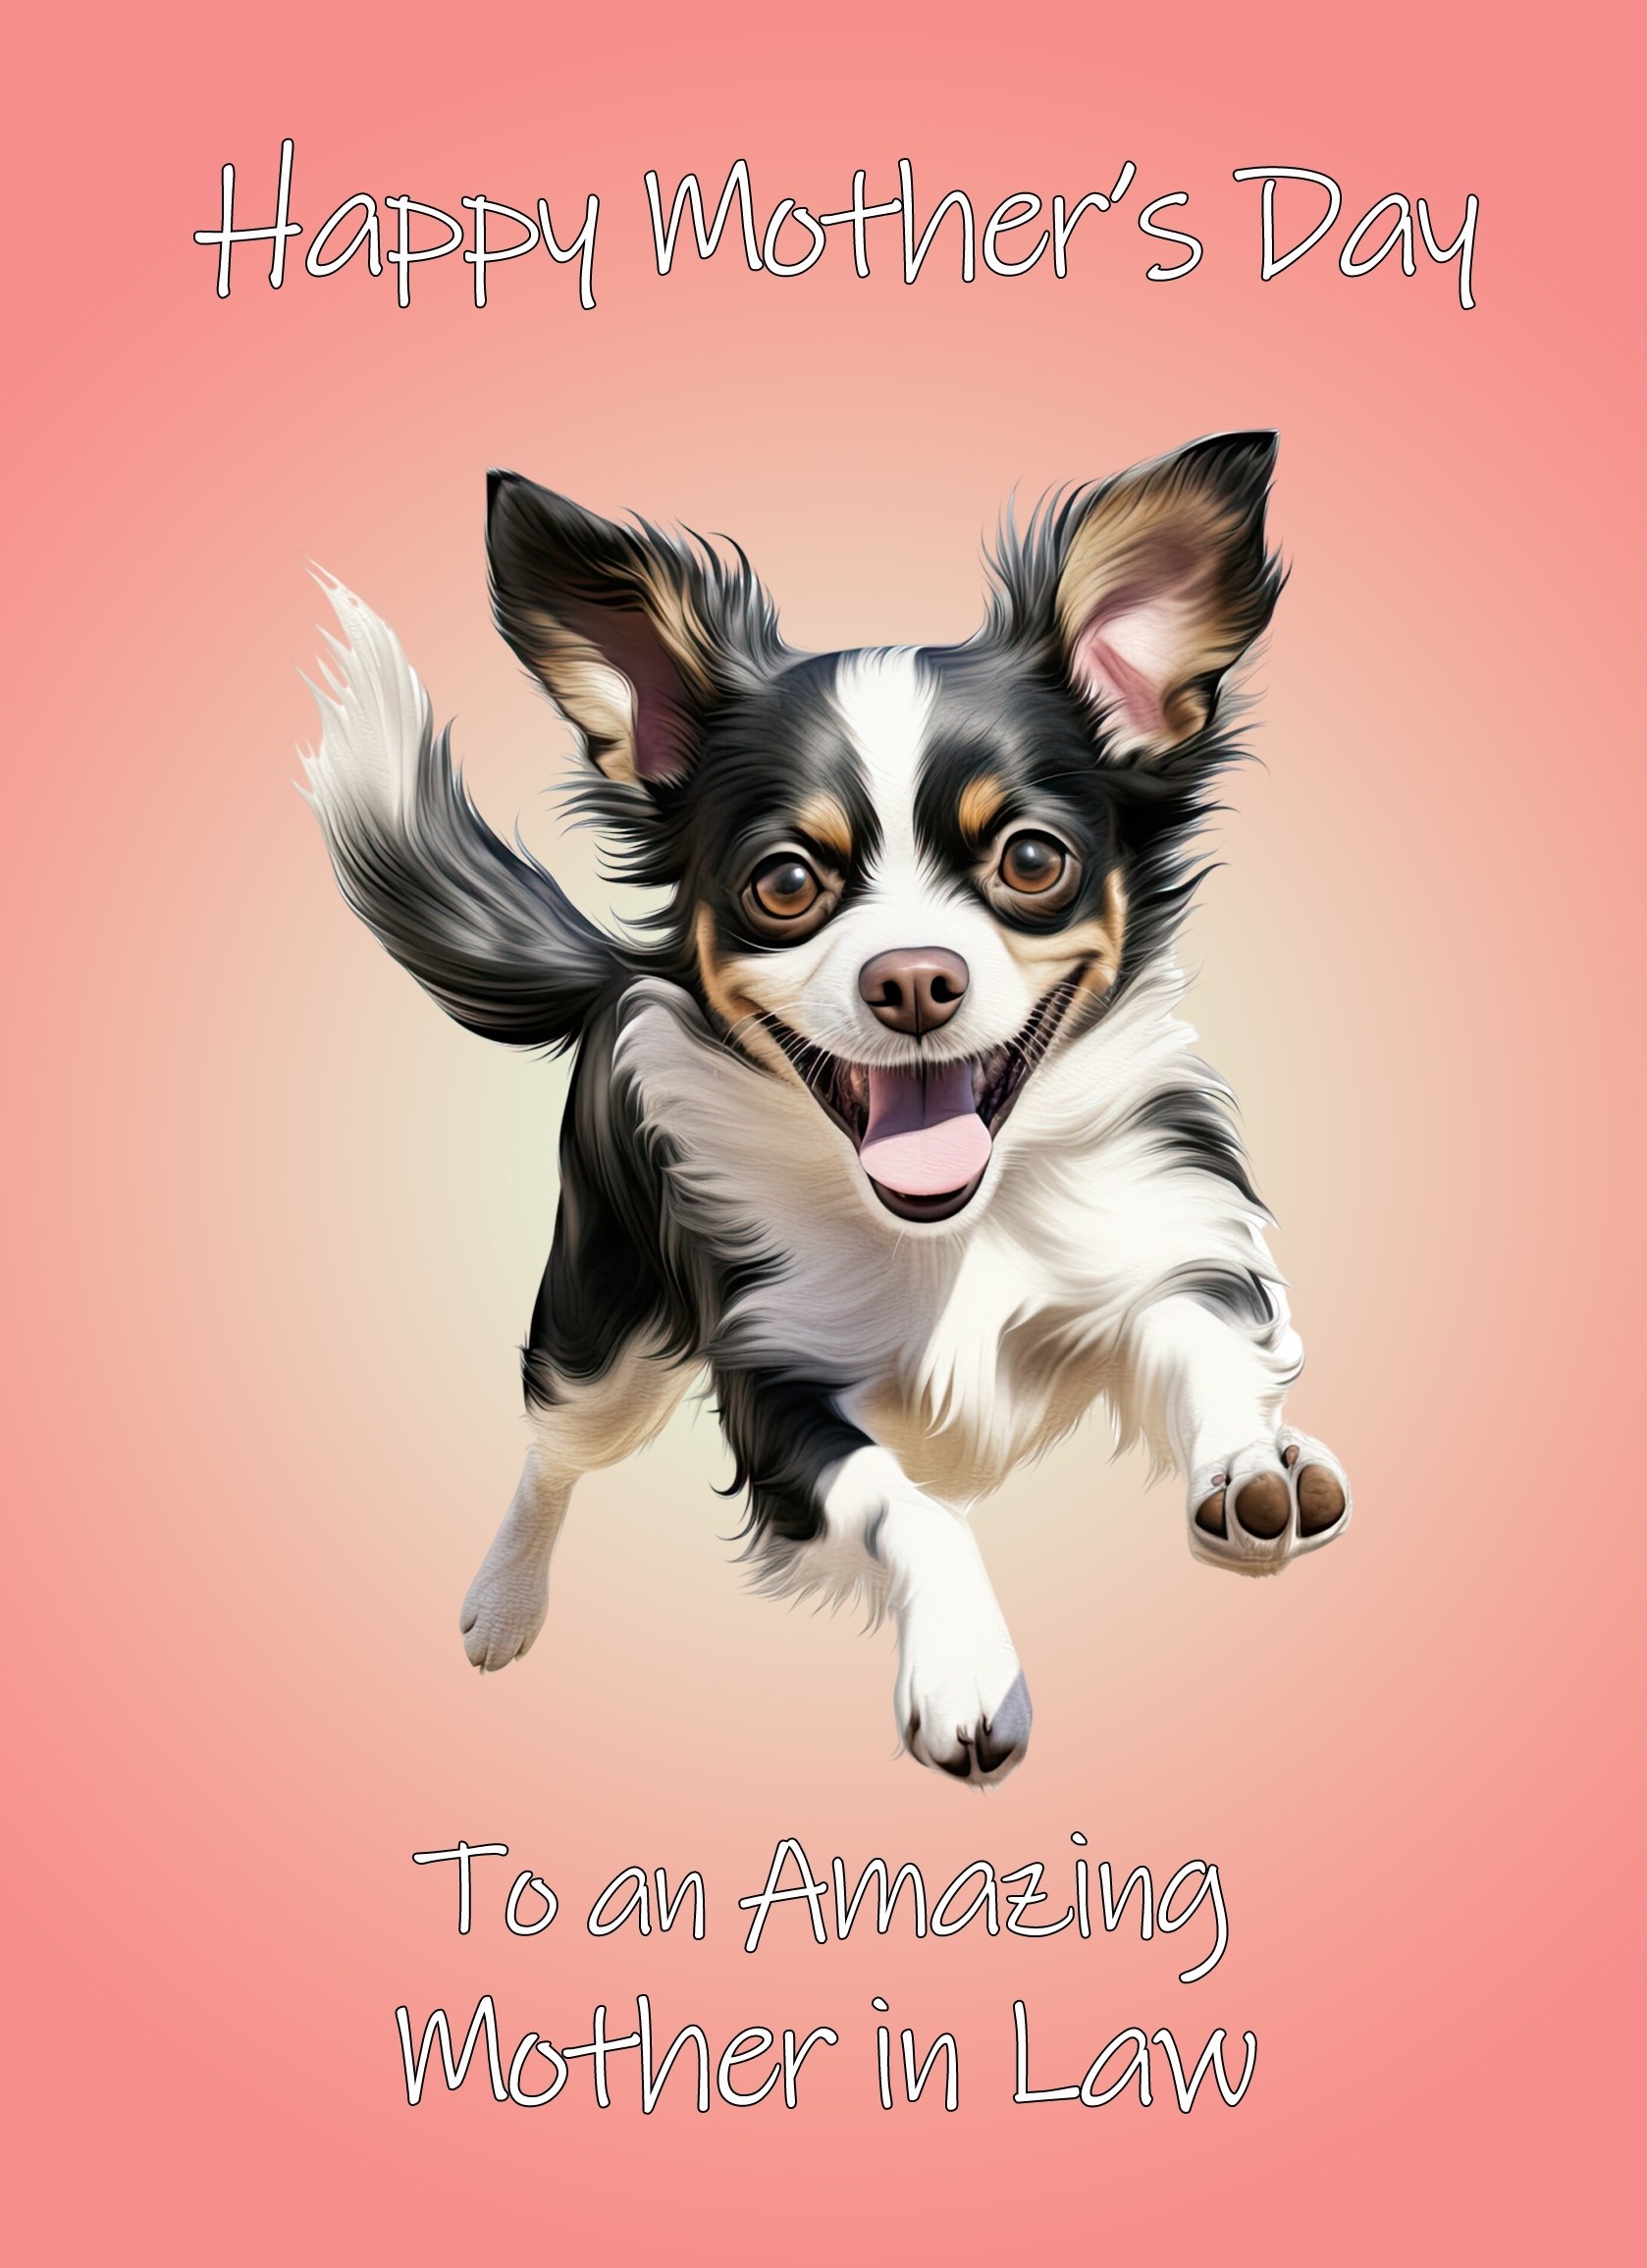 Chihuahua Dog Mothers Day Card For Mother in Law